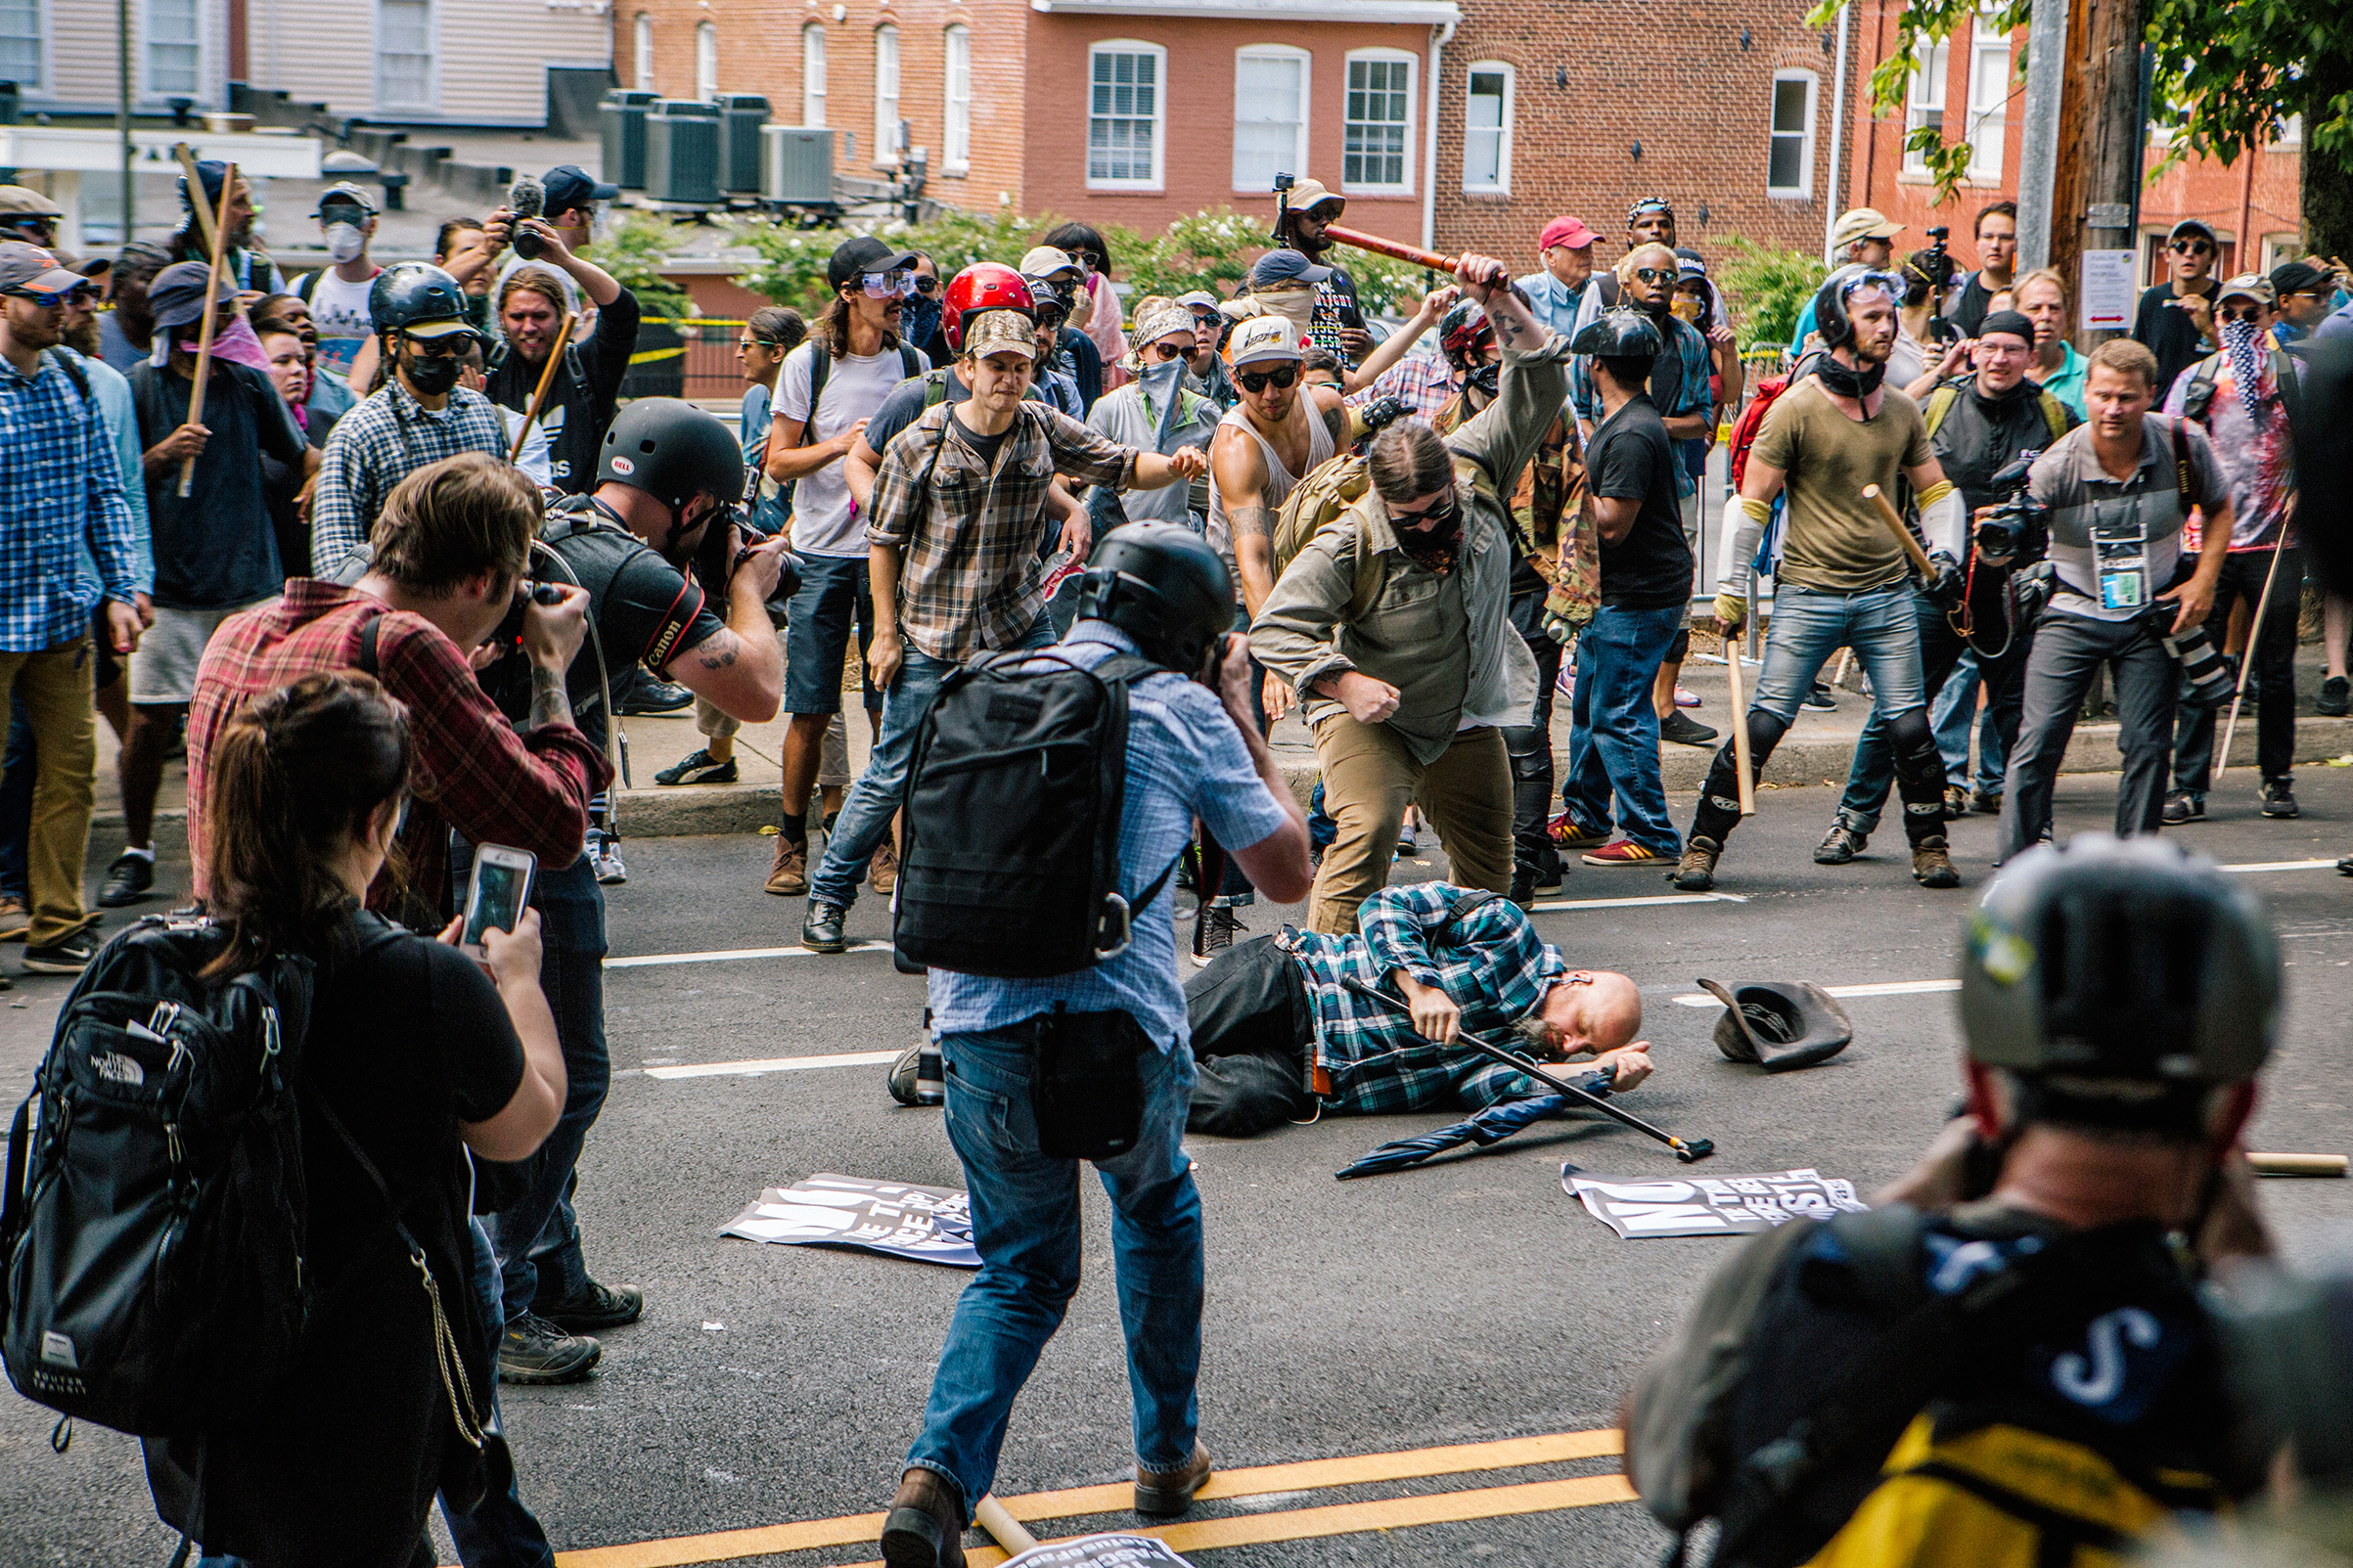 As police tried to clear the streets on Aug. 12, counterprotesters beat protesters in Charlottesville (Mark Abramson)